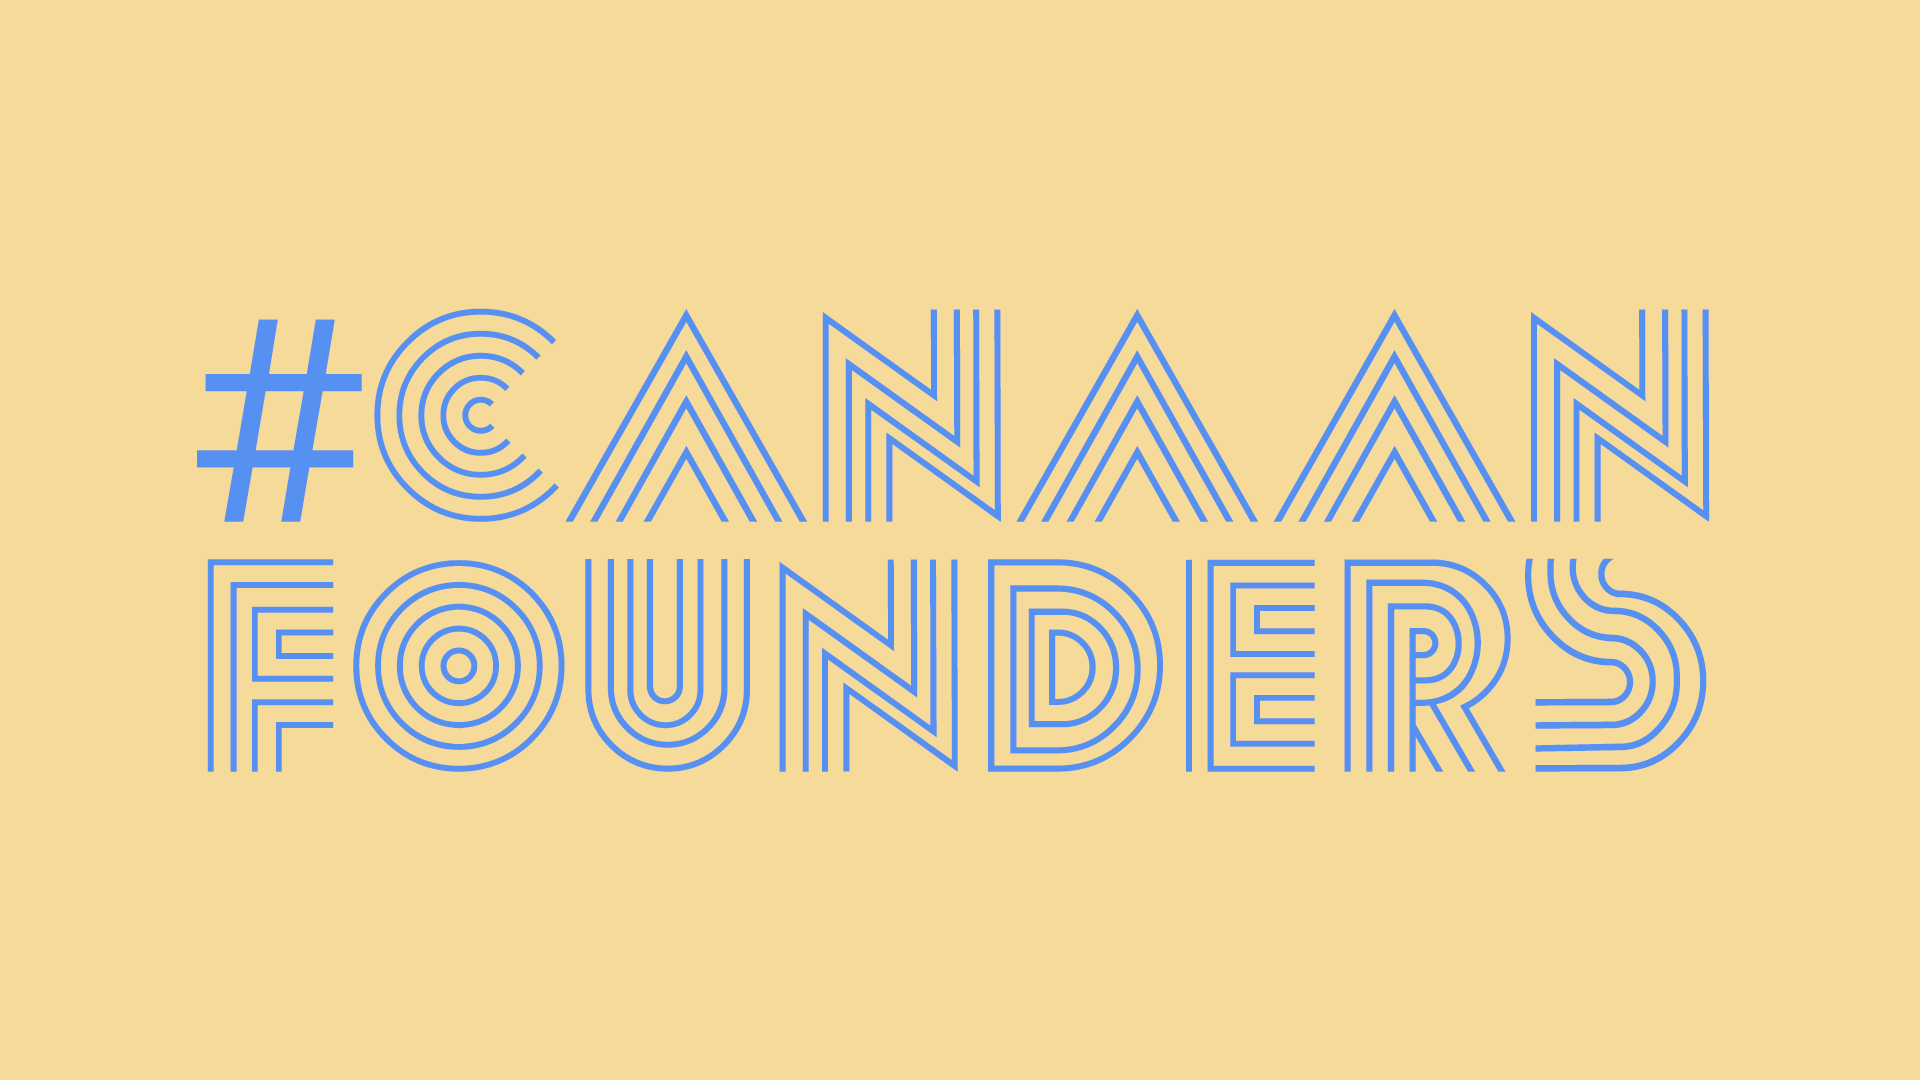 Introducing #CanaanFounders: A rapid-fire Q&A with company builders, in 280 characters or less